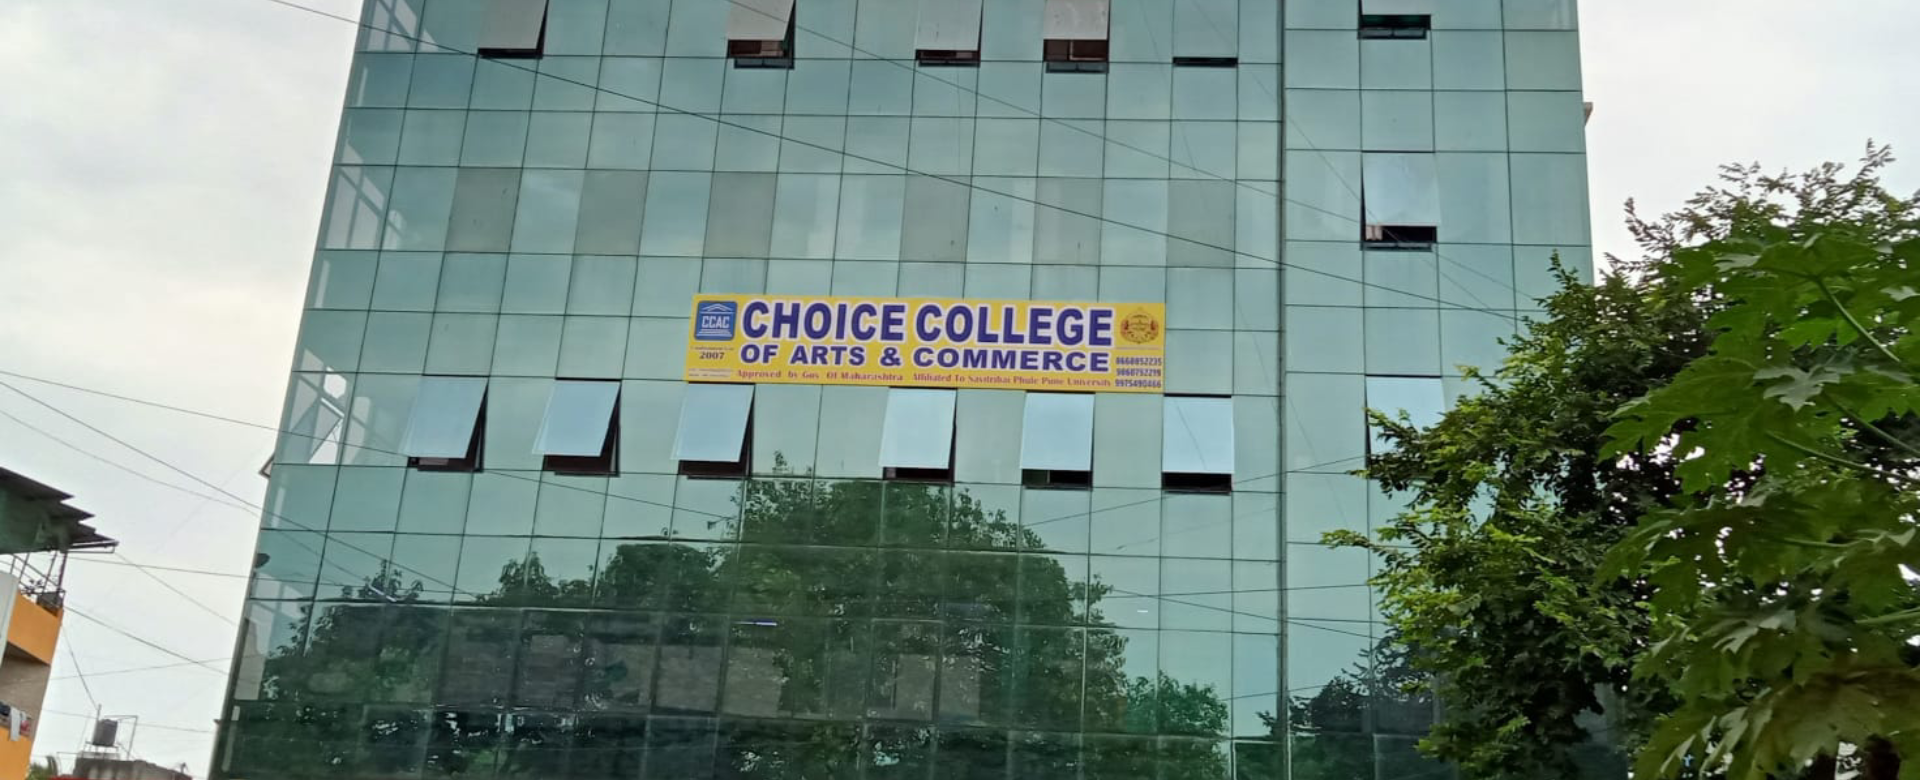 Choice College of Arts & Commerce